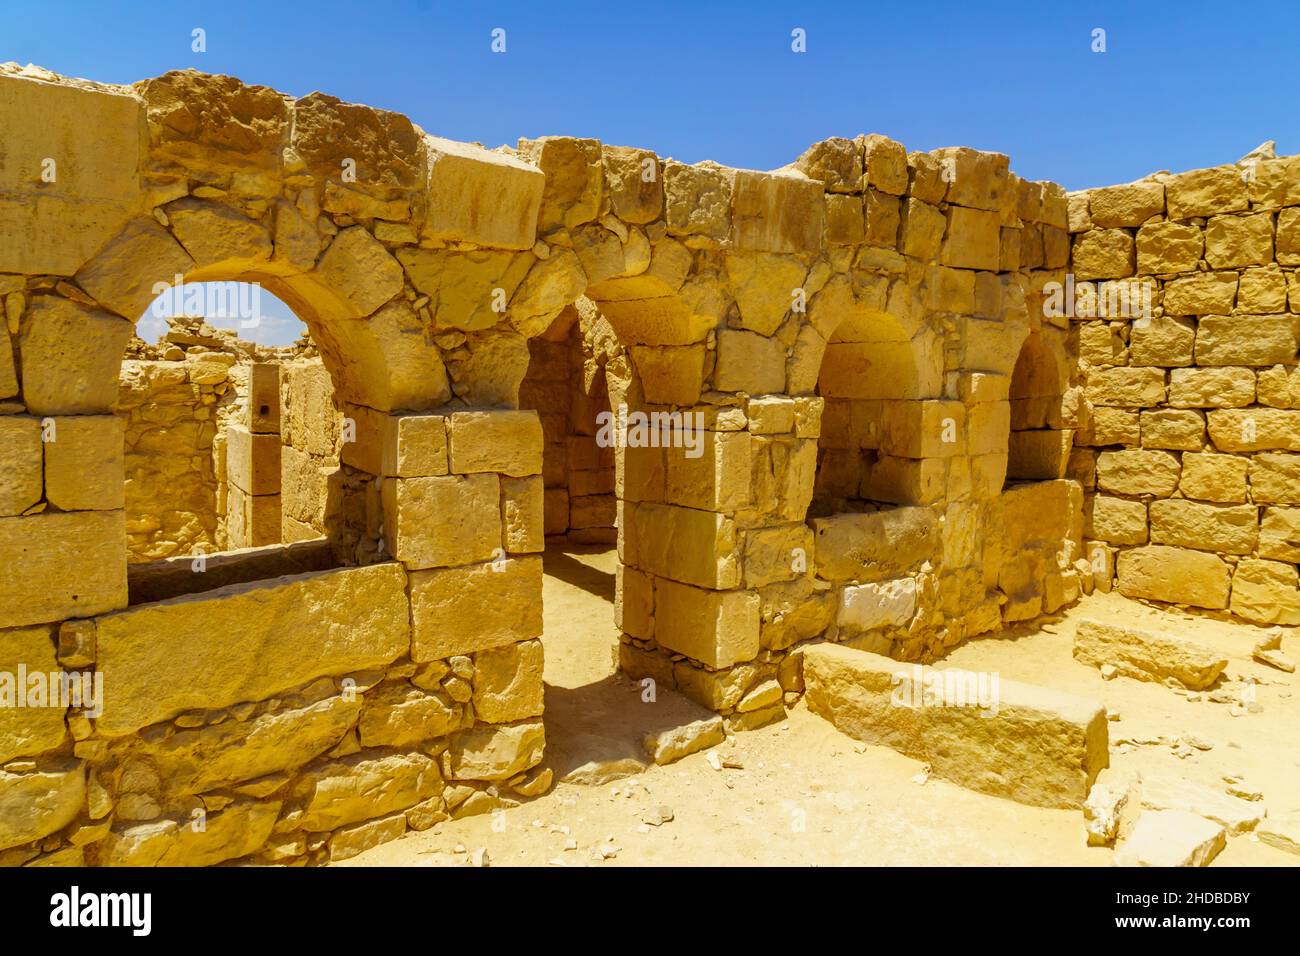 View of the ruined buildings in the ancient Nabataean city of Shivta, now a national Park, in the Negev Desert, Southern Israel Stock Photo